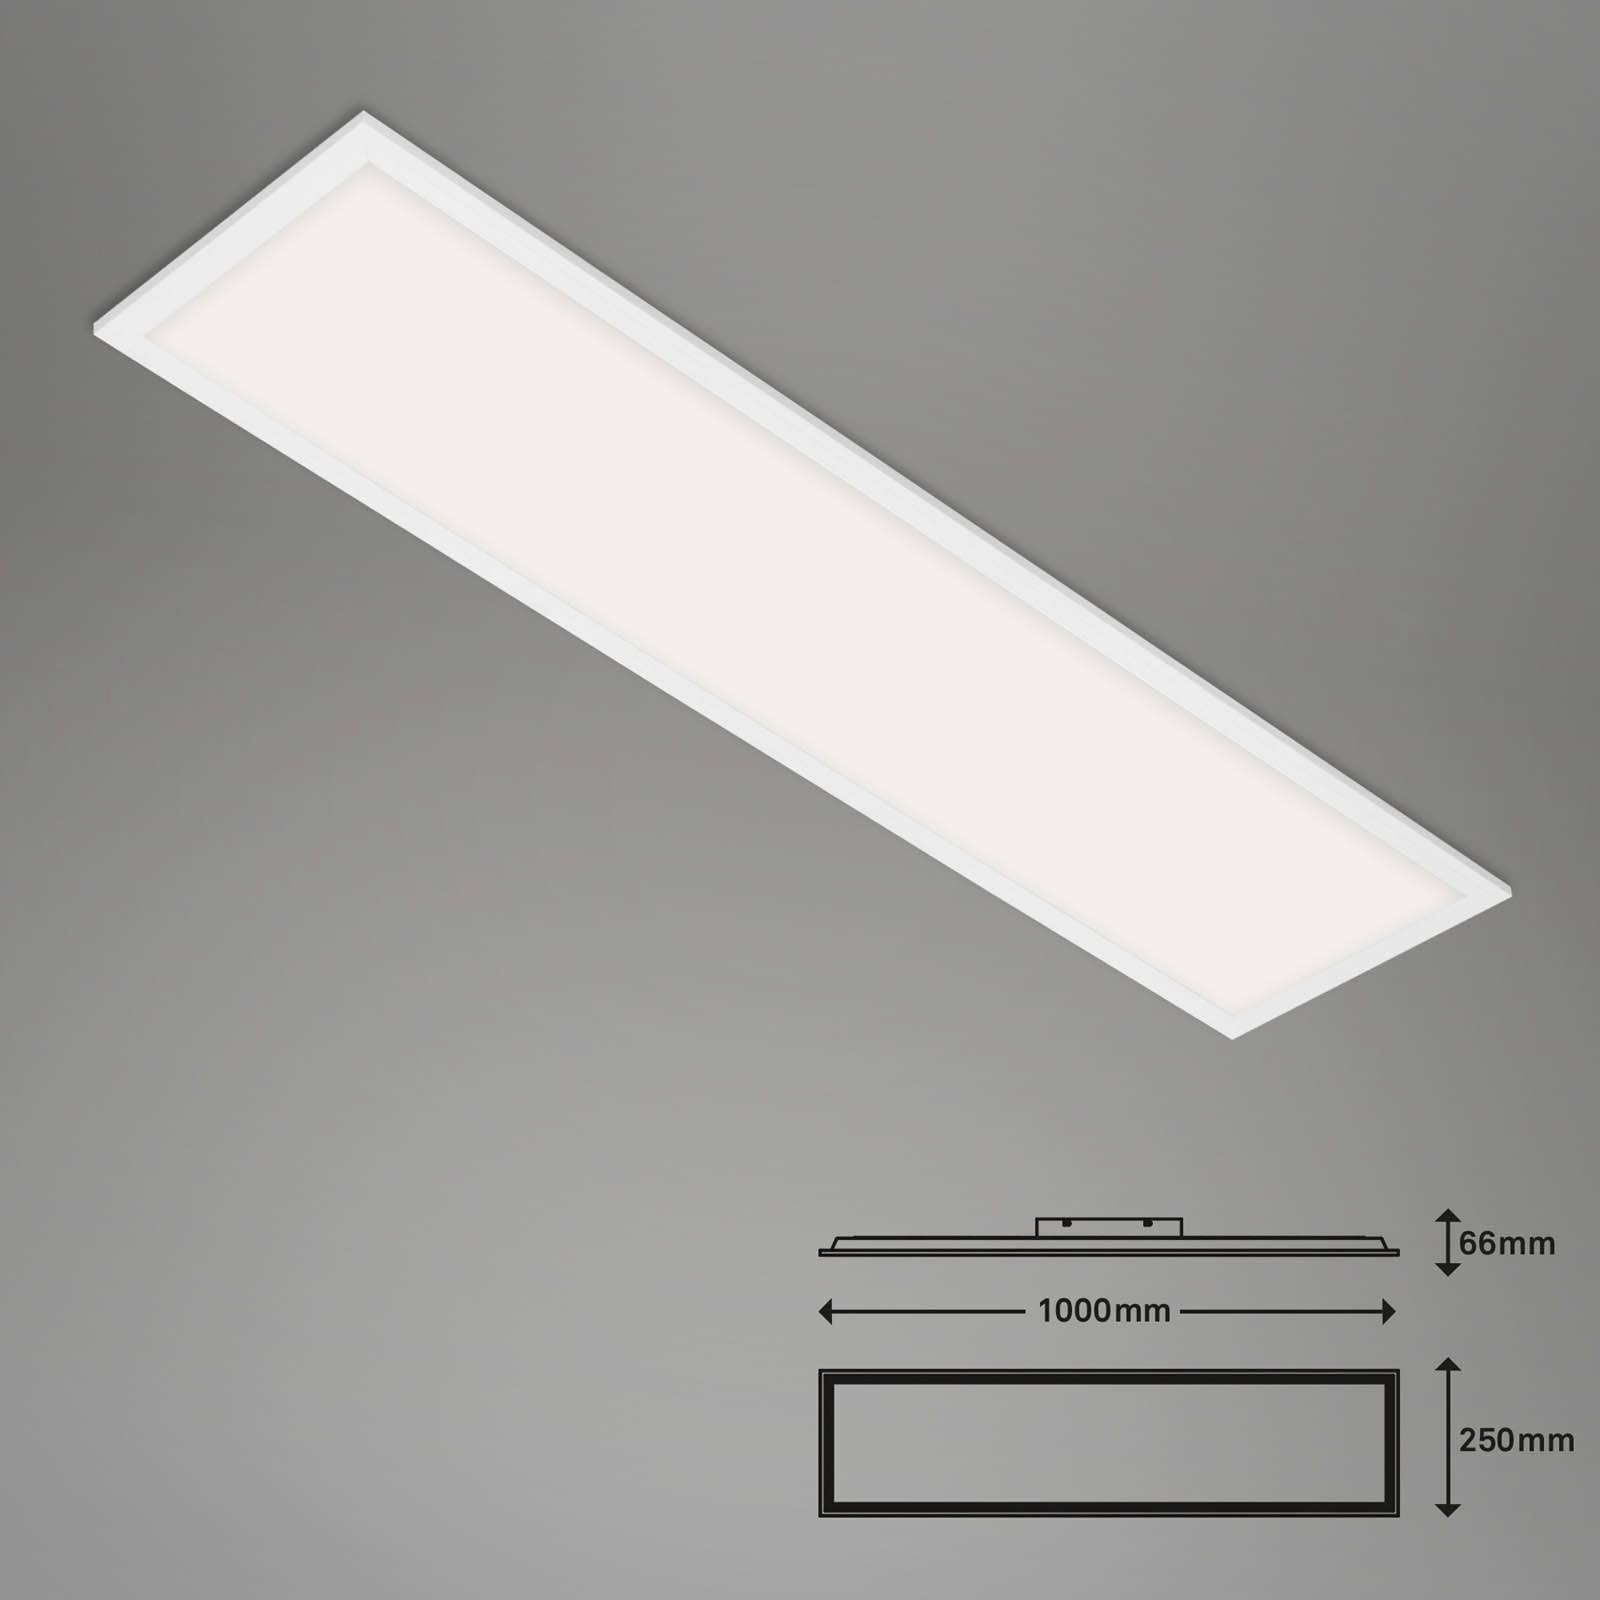 Photos - Chandelier / Lamp Briloner LED ceiling lamp Piatto S dimmable CCT white 100x25cm 